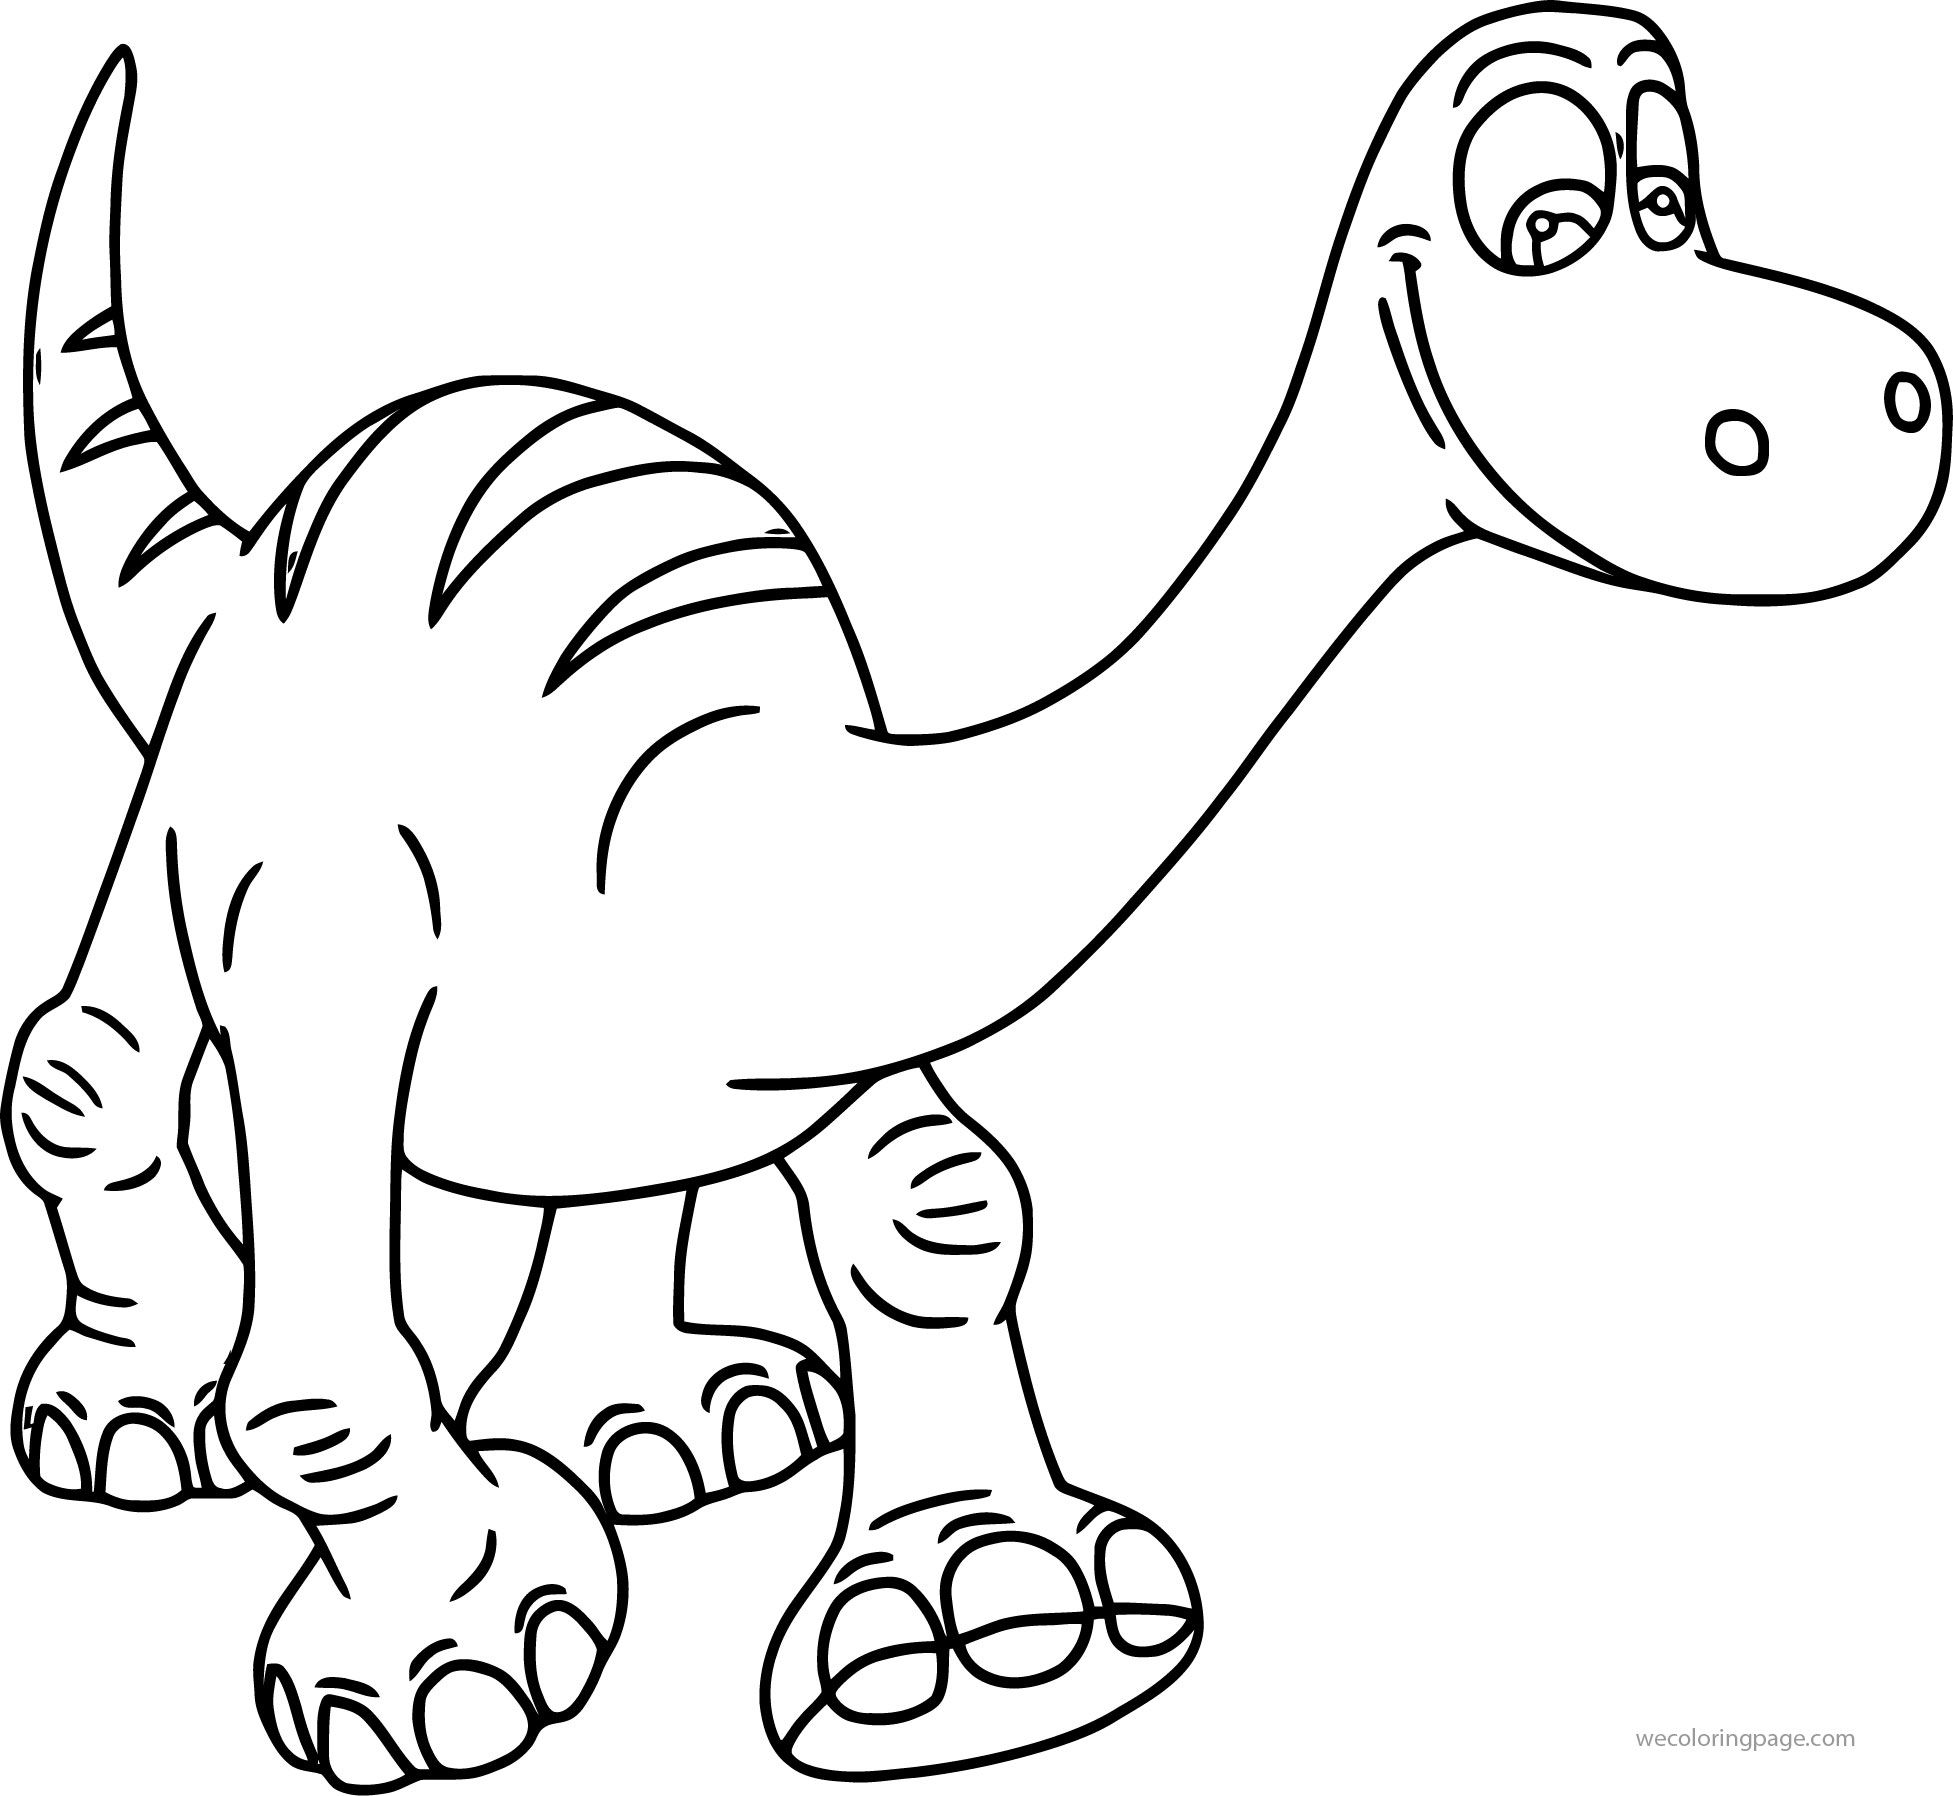 The Good Dinosaur Disney Coloring Pages | Wecoloringpage